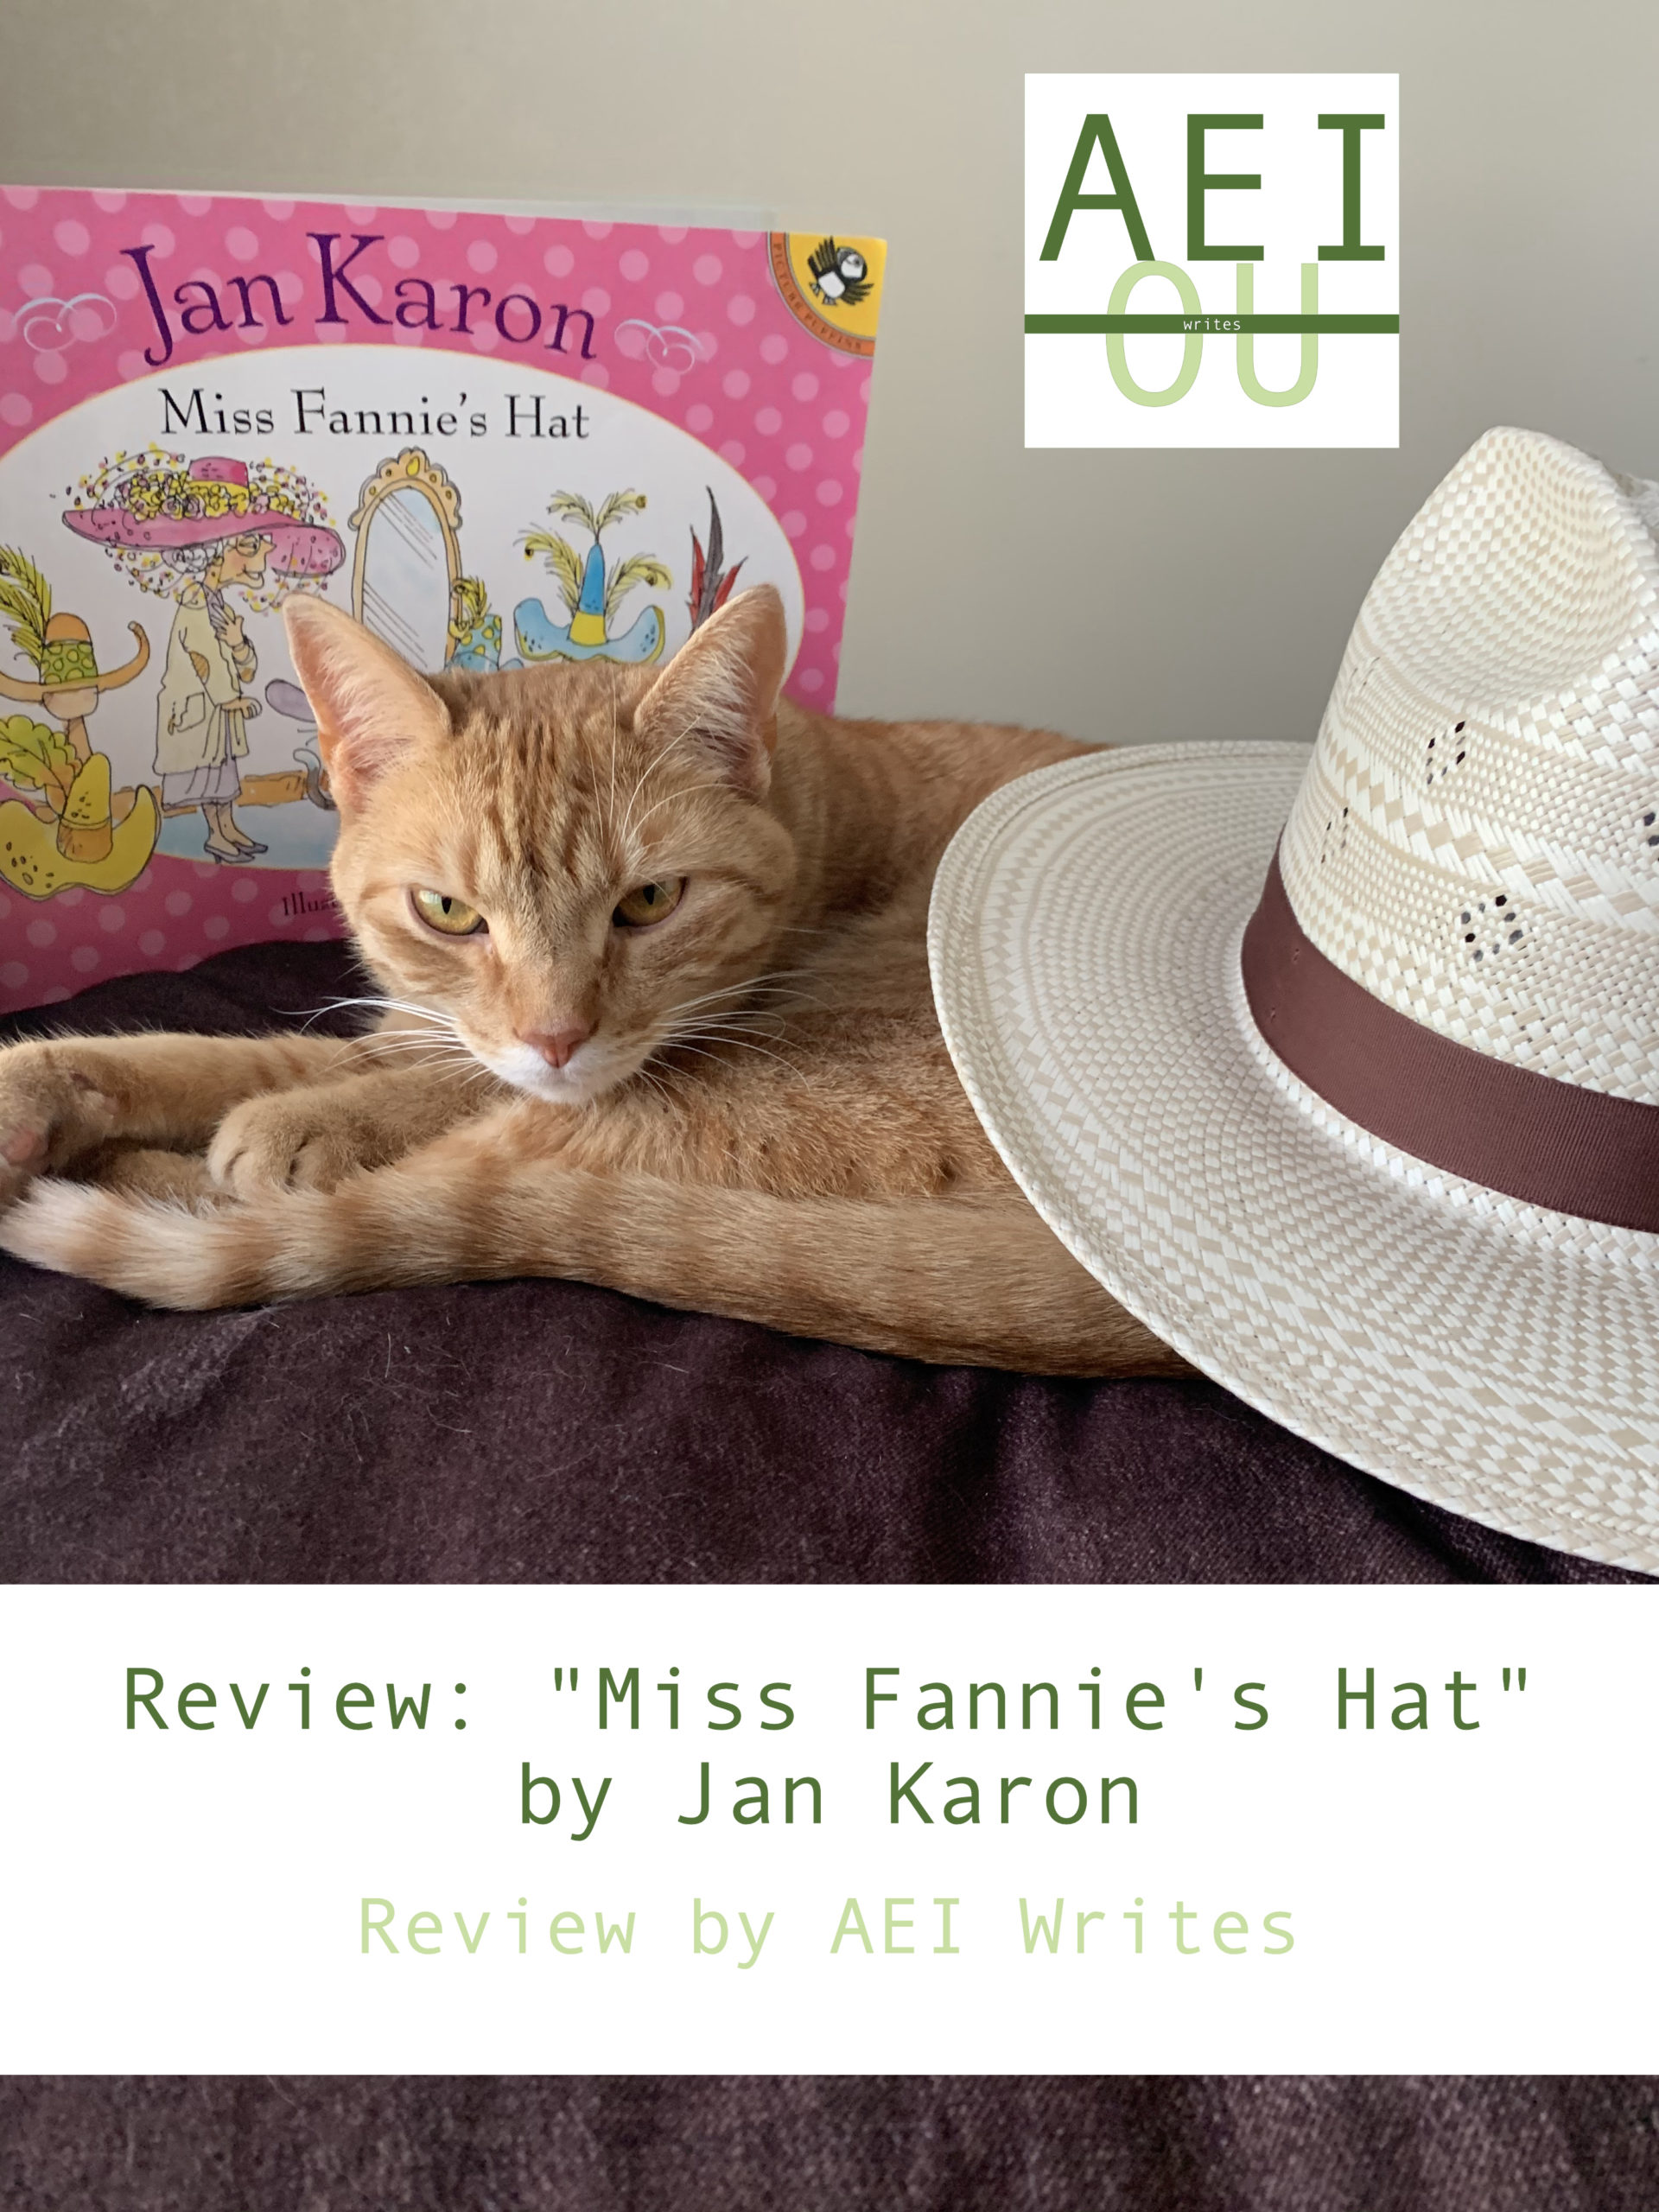 Review: “Miss Fannie’s Hat” by Jan Karon